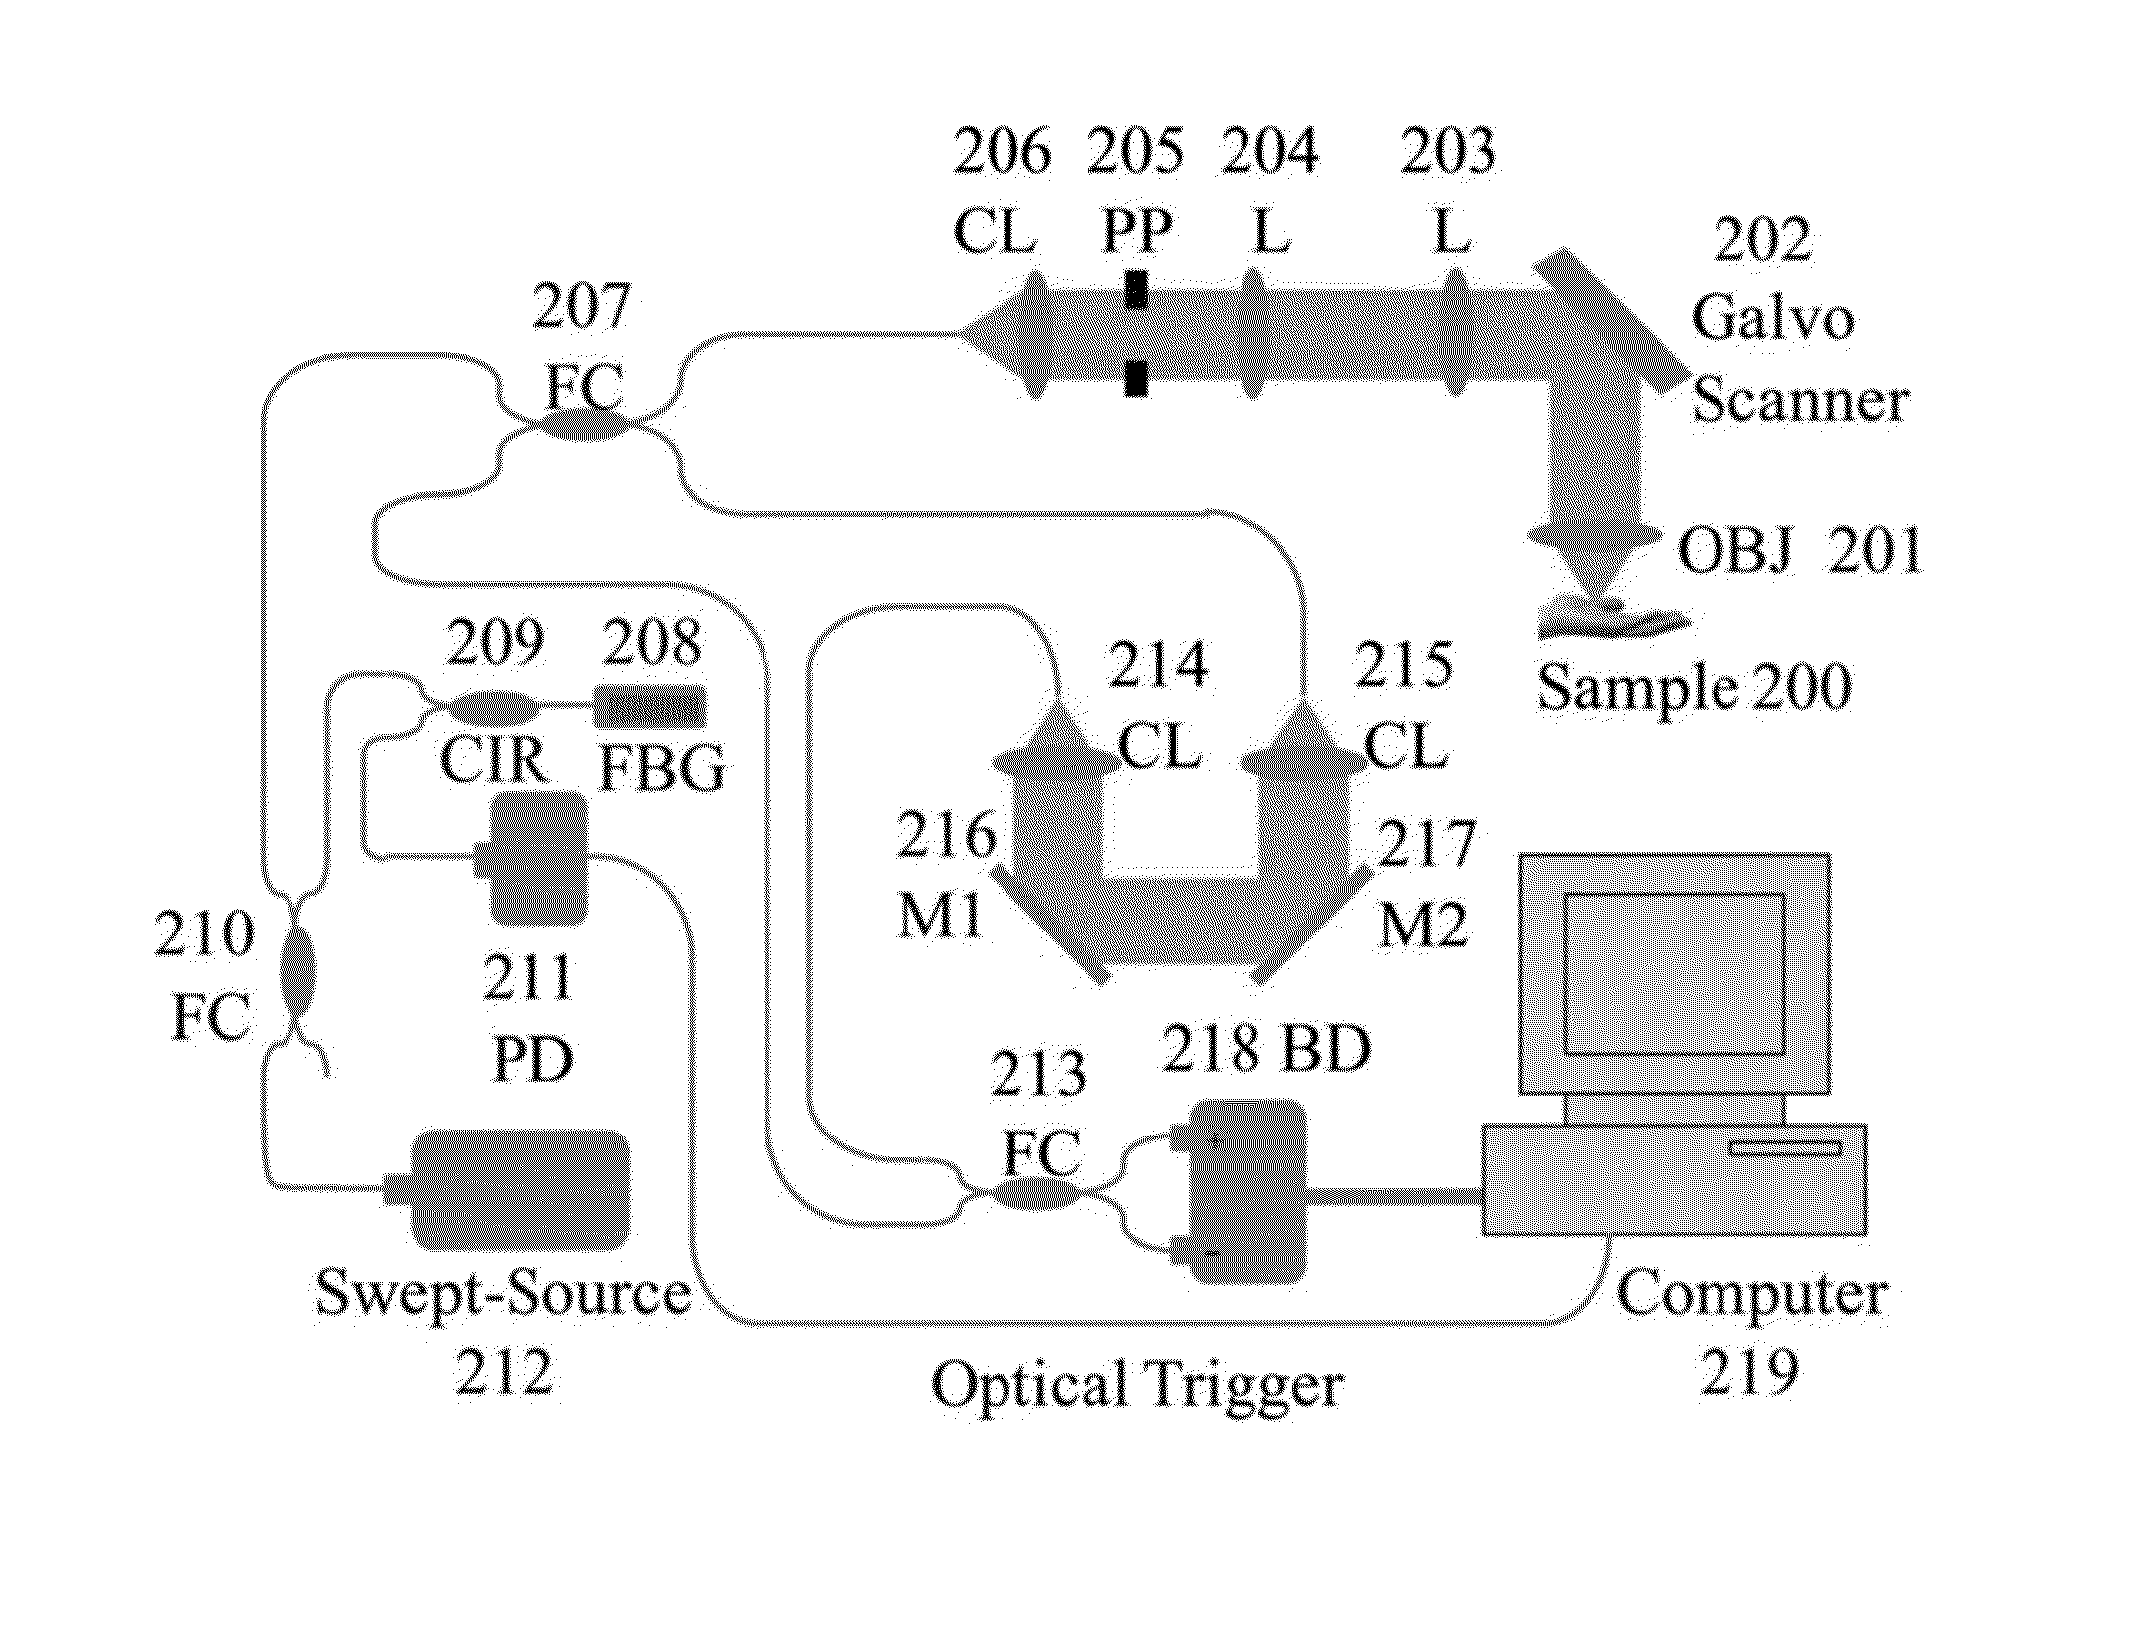 Systems, method and computer-accessible medium which utilize synthetic aperture(s) for extending depth-of-focus of optical coherence tomography imaging